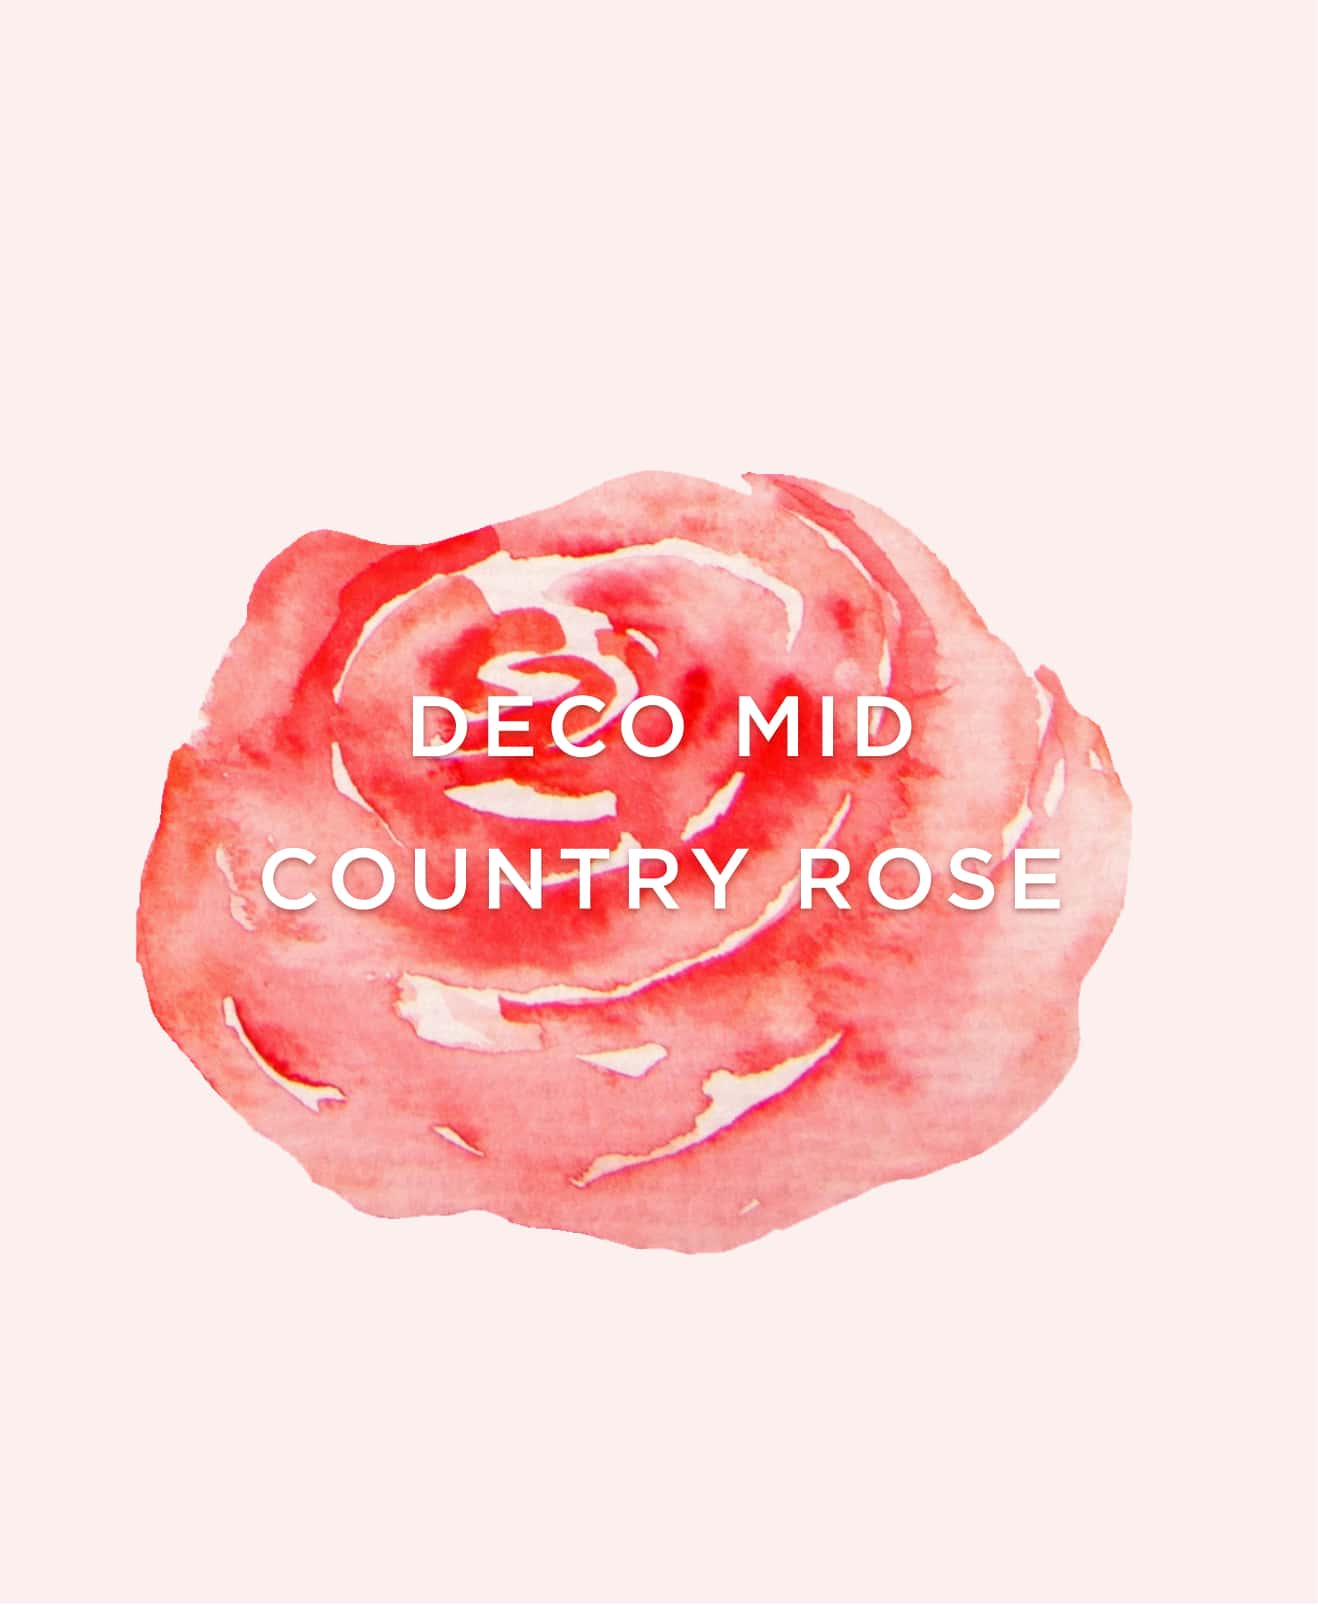 DECO MID COUNTRY ROSE